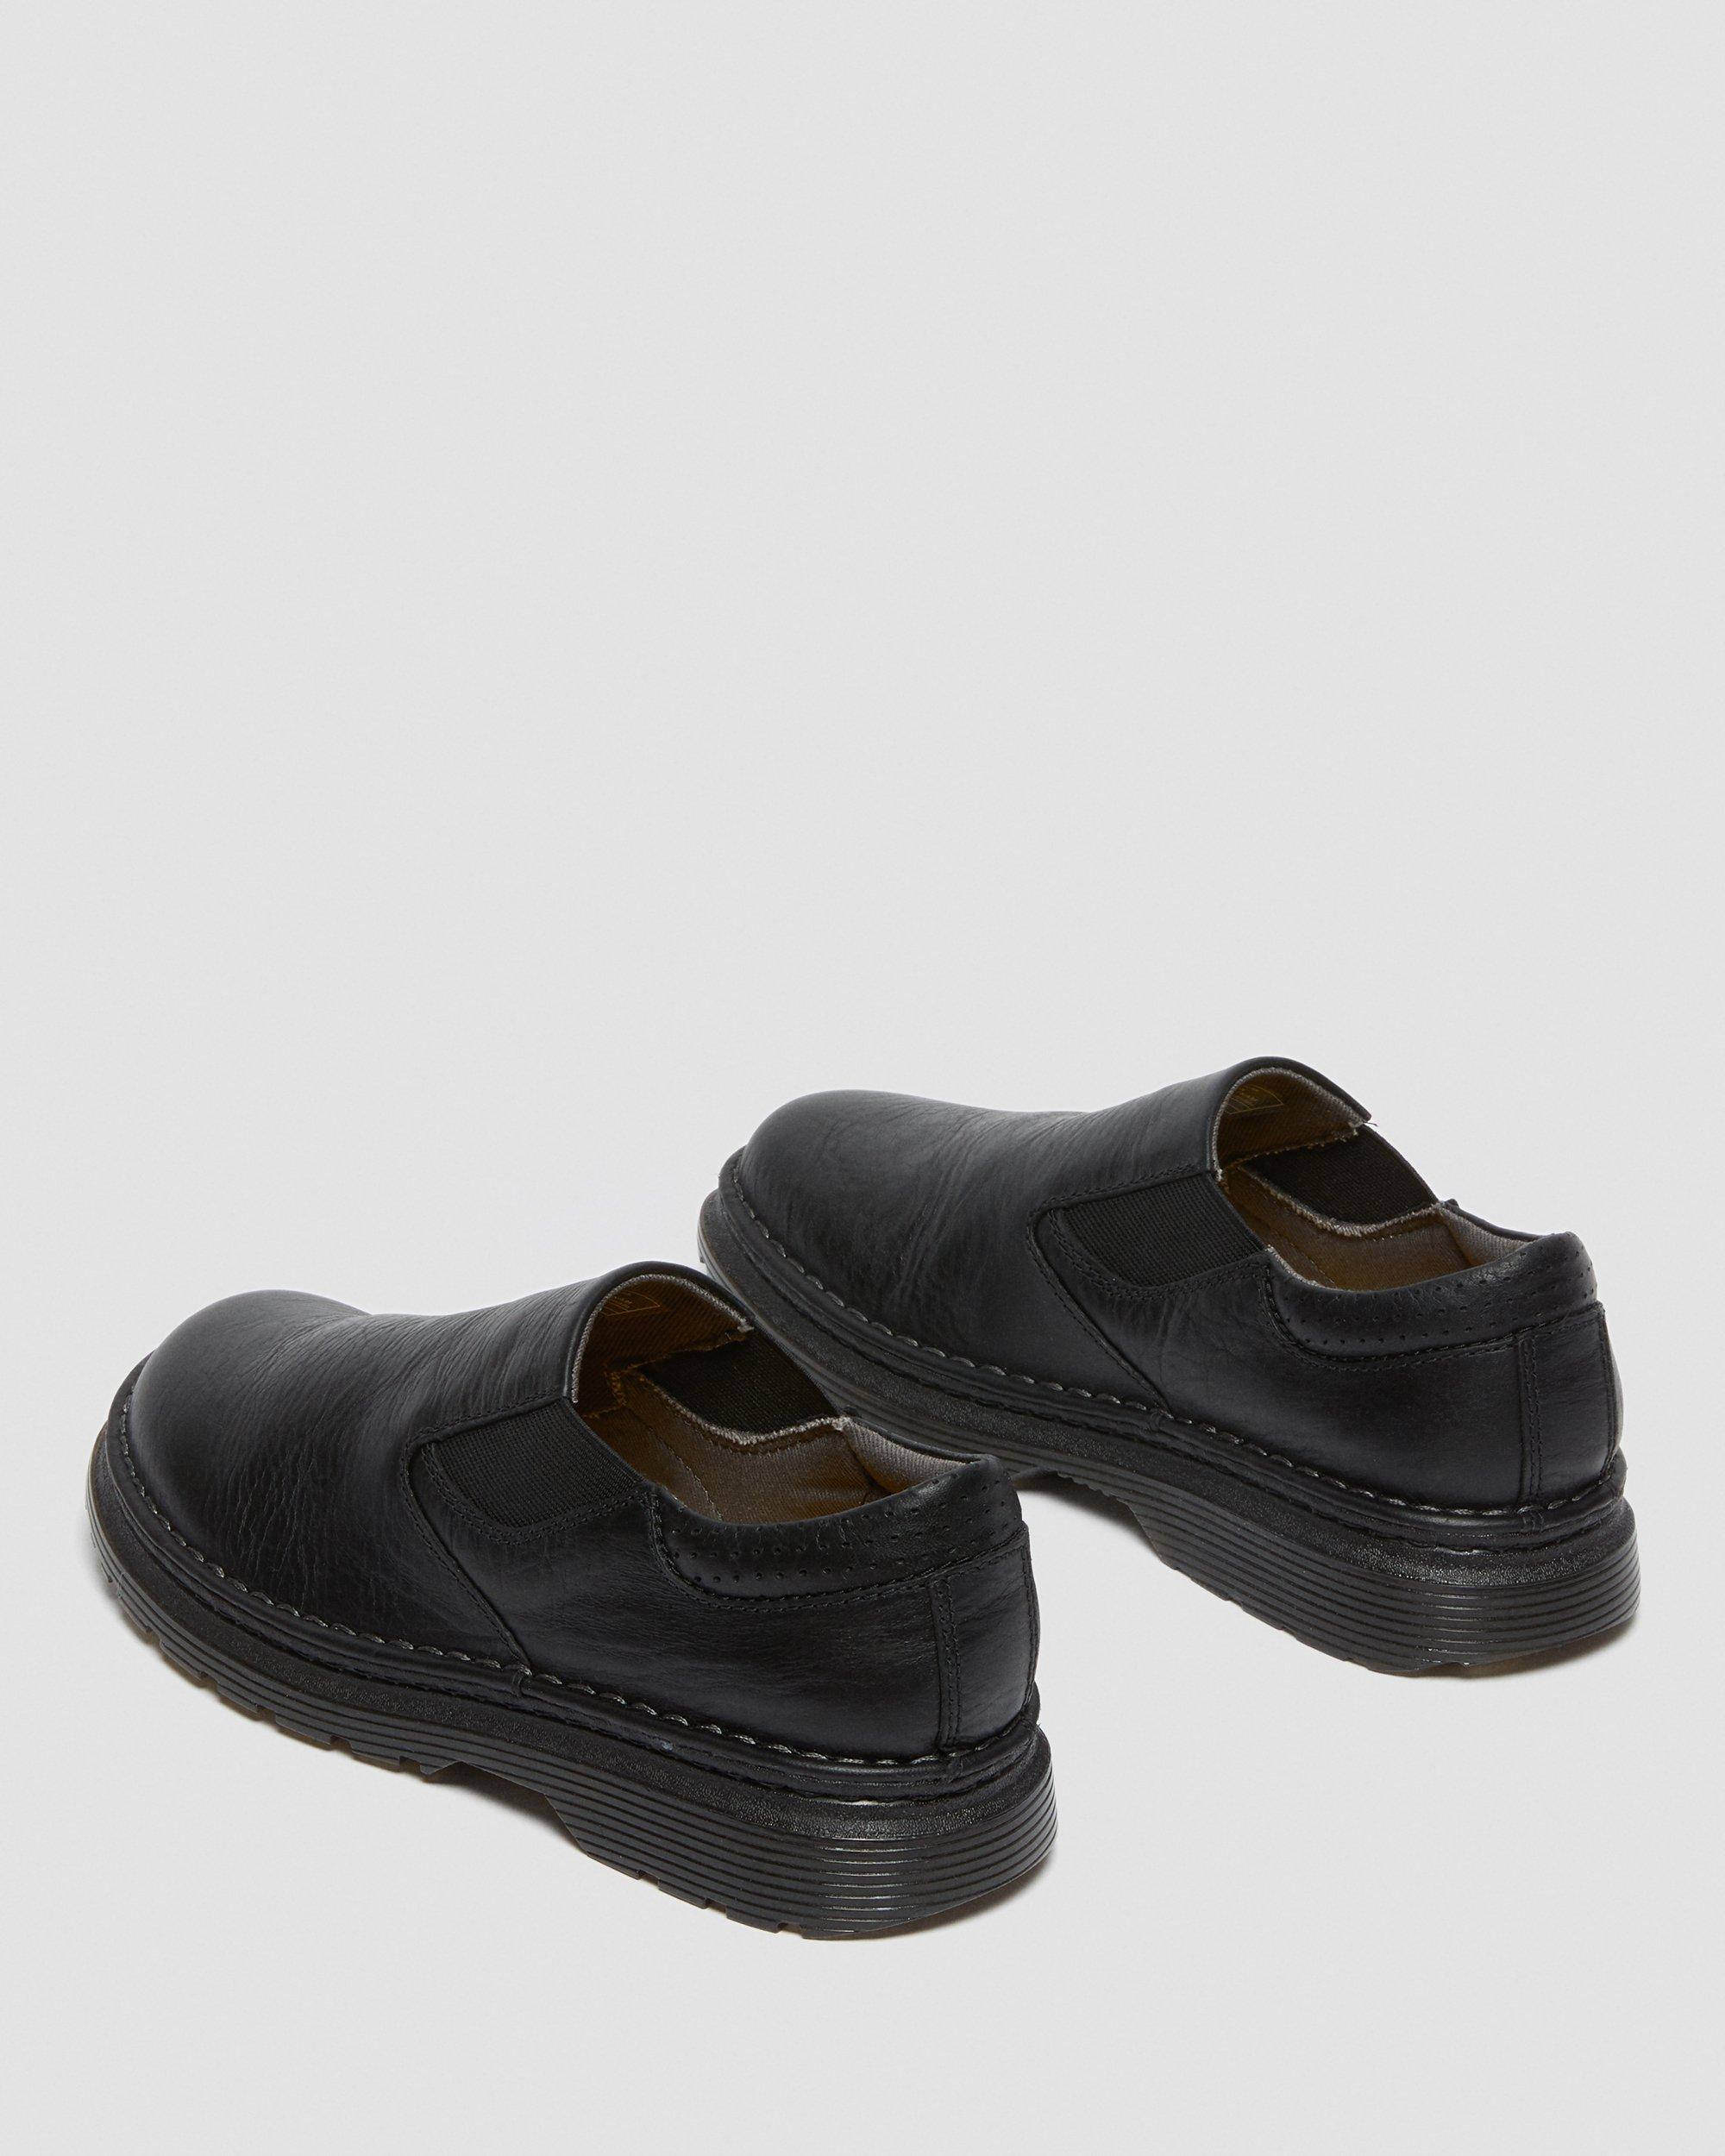 mens grey leather slip on shoes